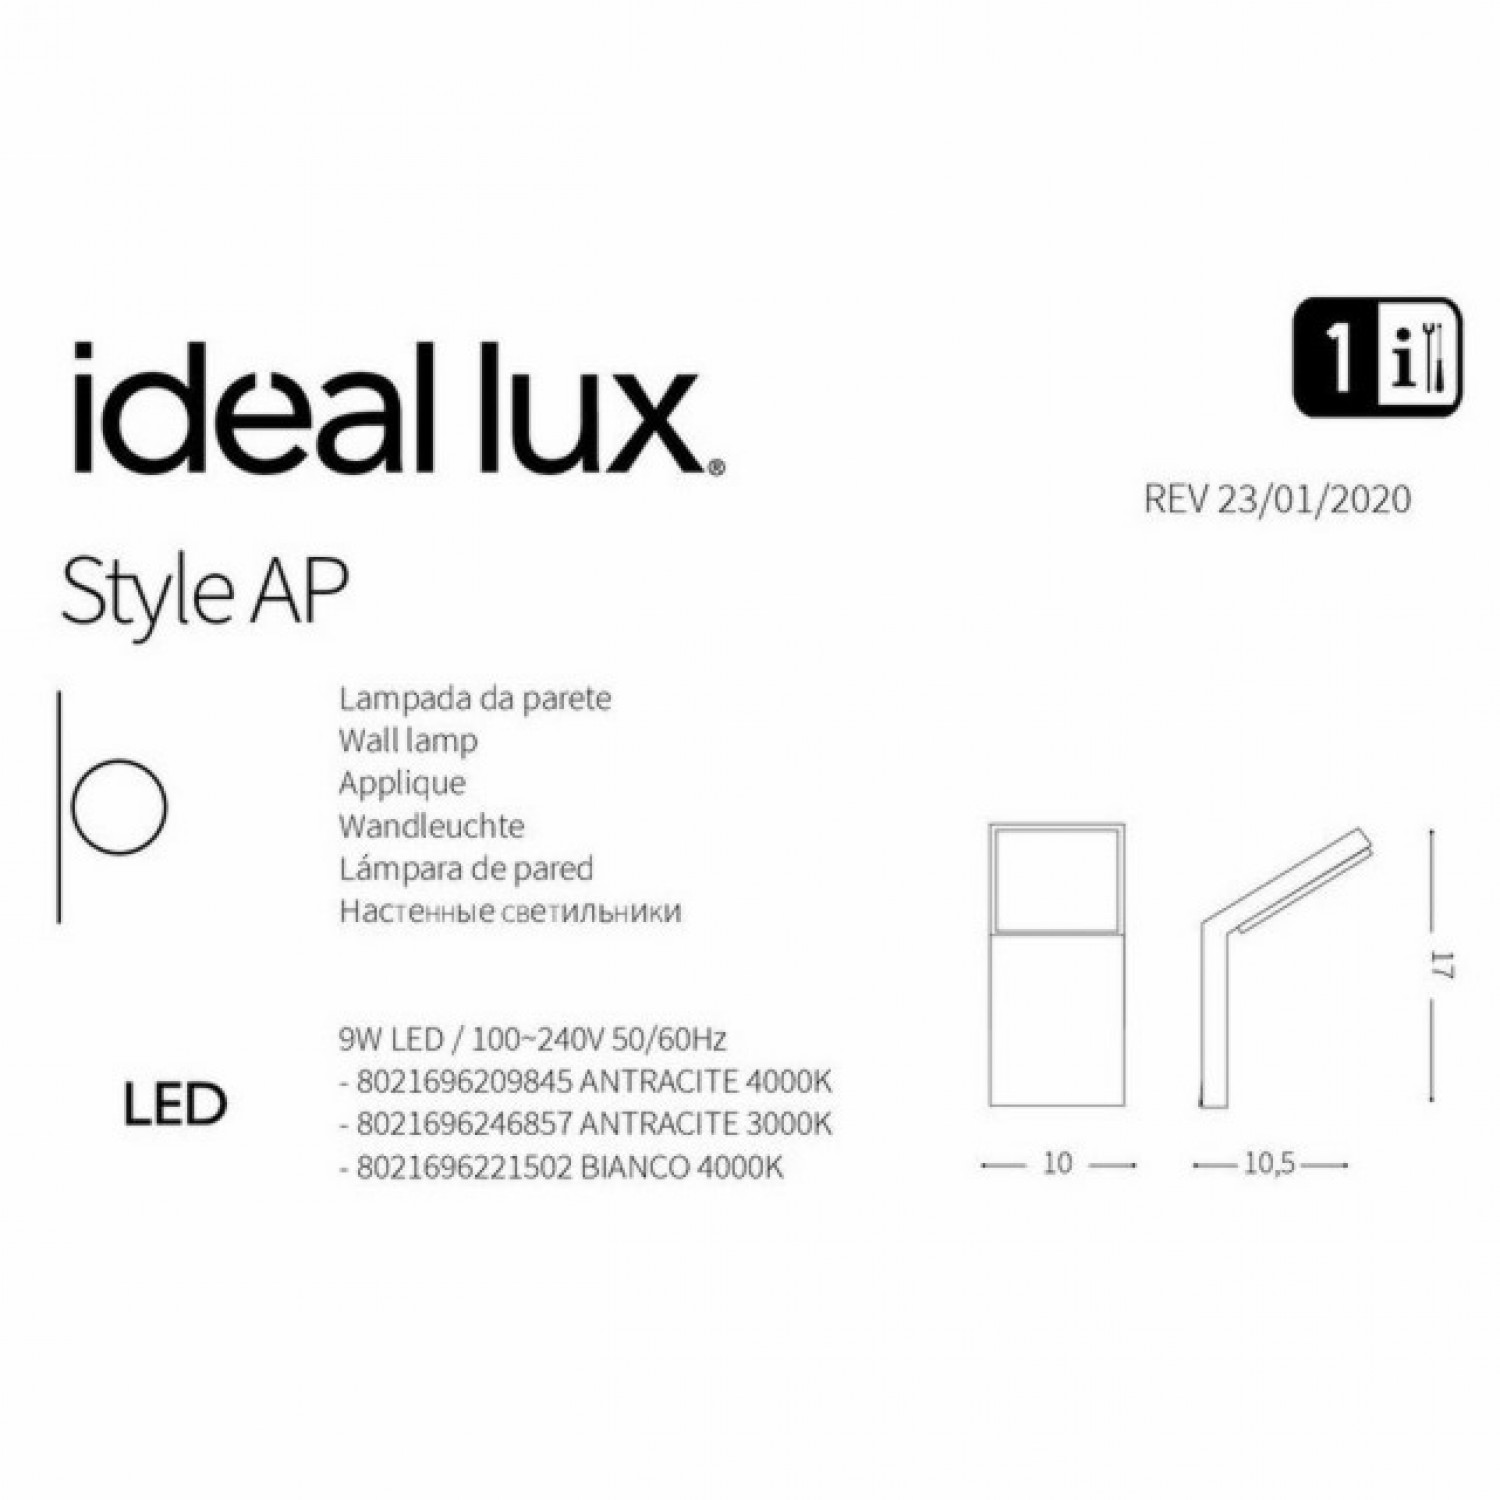 Бра Ideal Lux STYLE AP ANTRACITE 3000K 246857